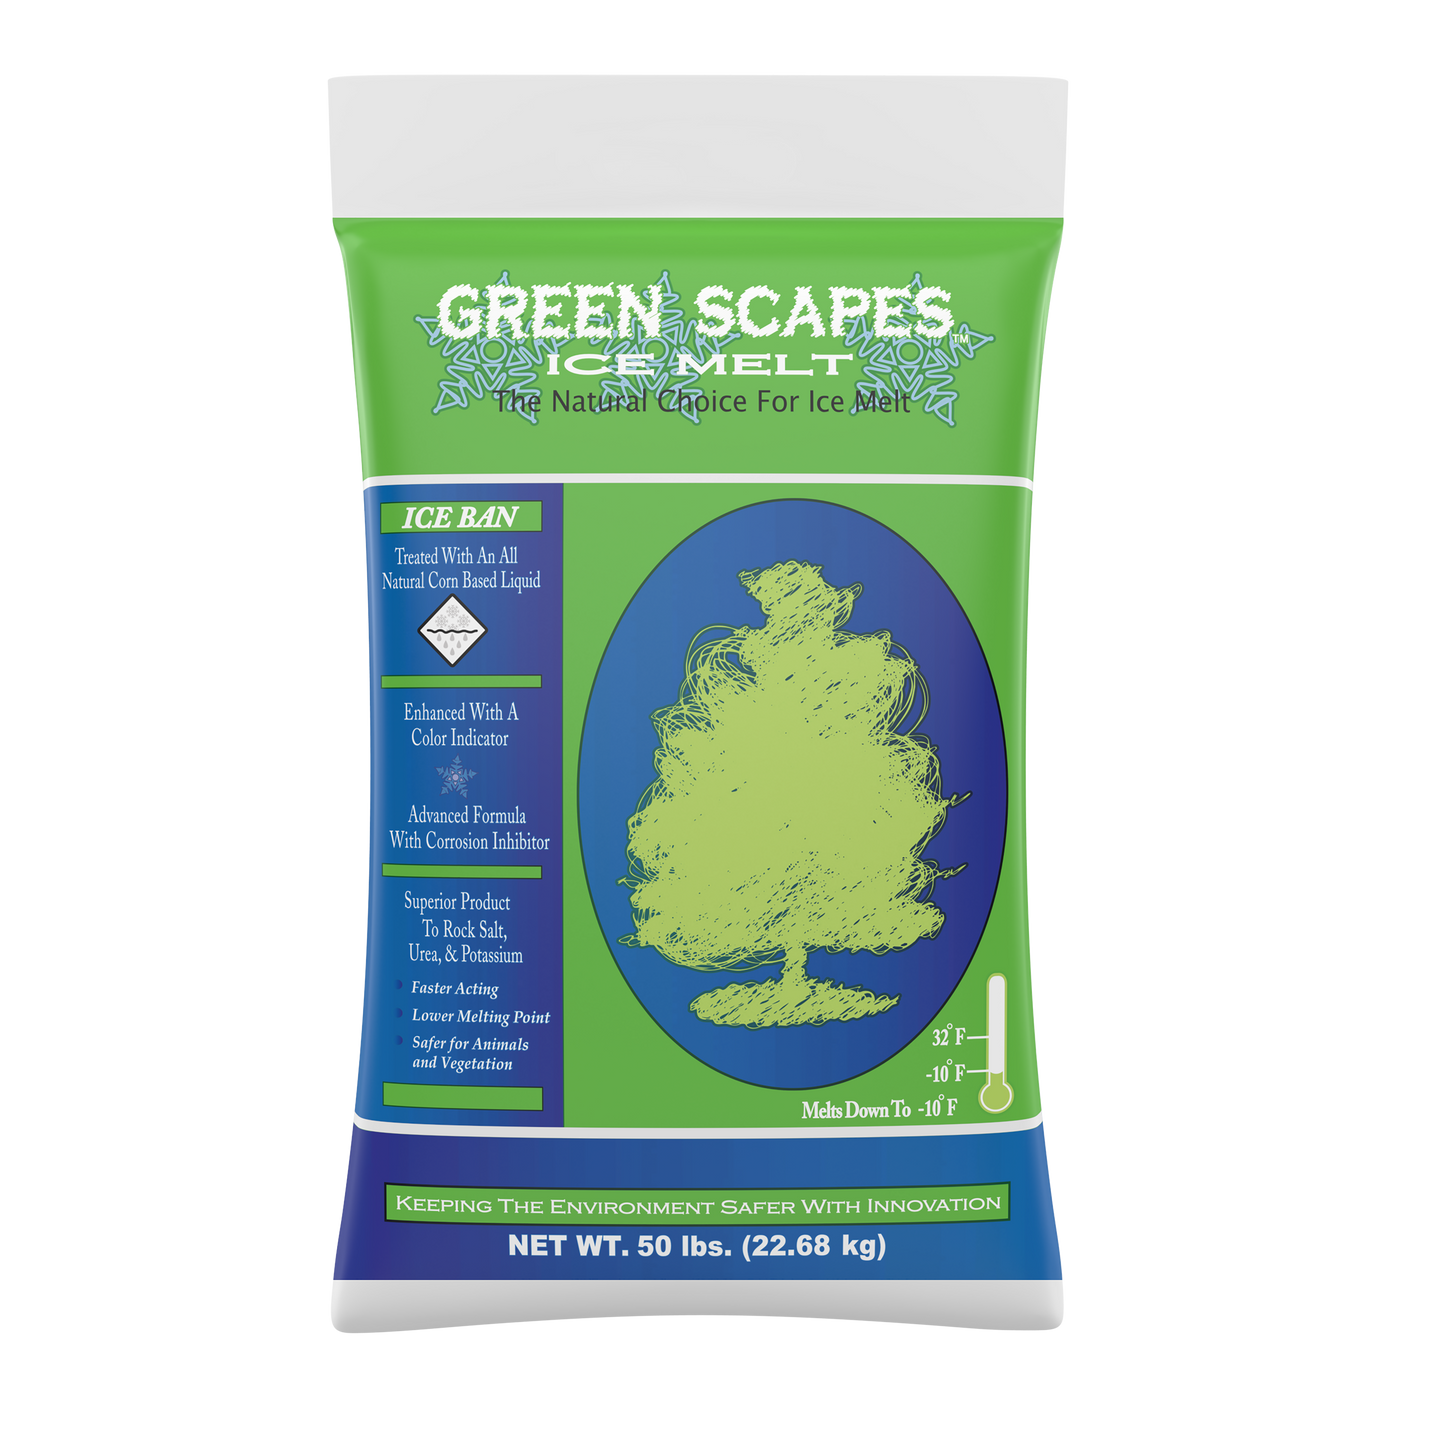 Green Scapes™ ice melter is an Eco-friendly, fast acting ice and snow melter composed of natural ingredients that's safer on sidewalks, animals, vegetation, carpeting and the environment.